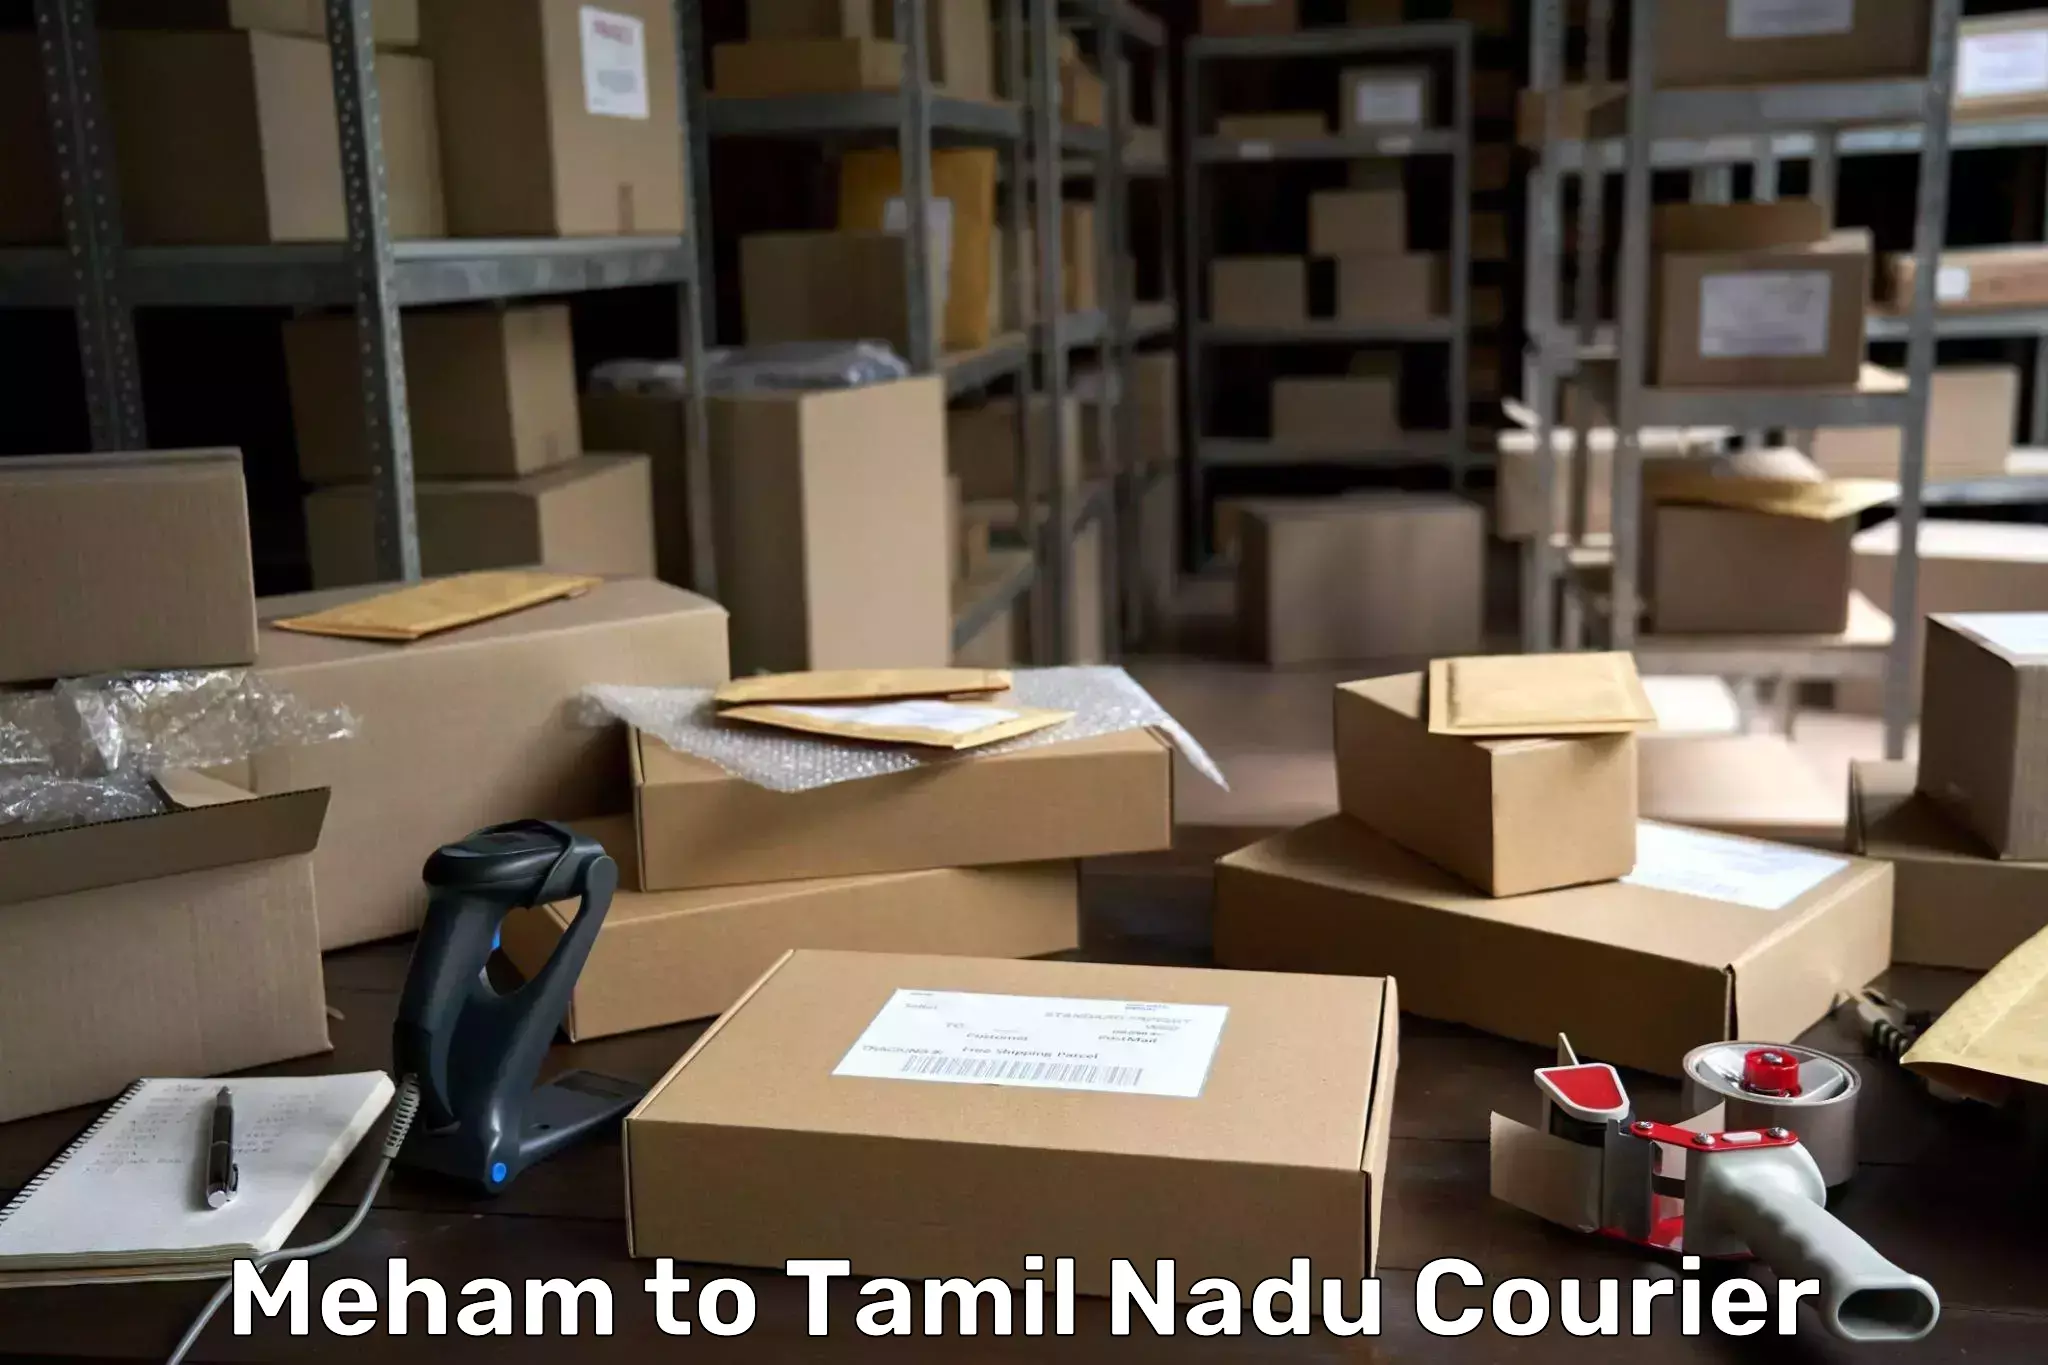 Express delivery capabilities Meham to Mayiladuthurai